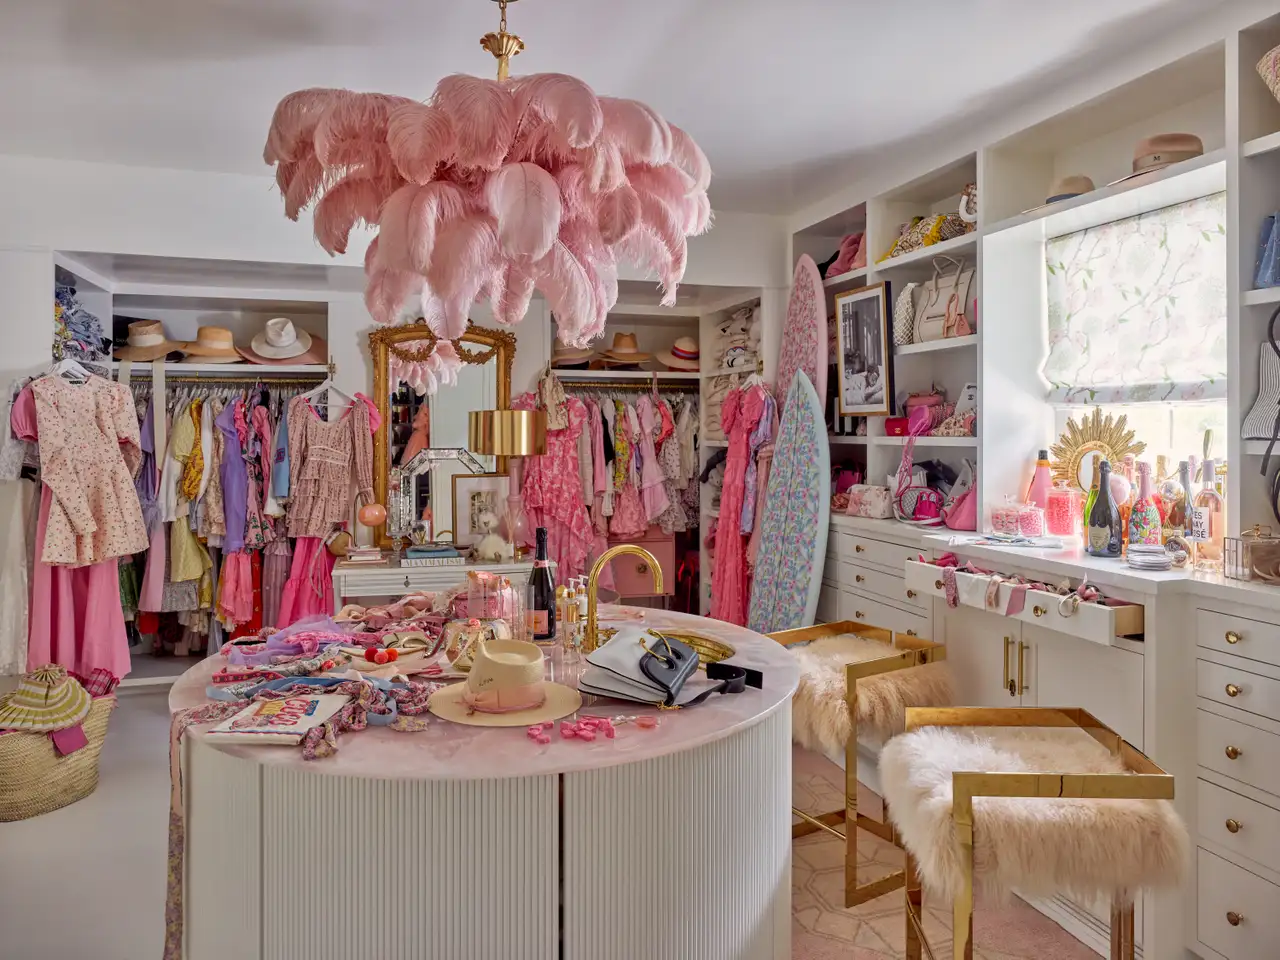 Closet featuring a big pink feathers suspension lamp